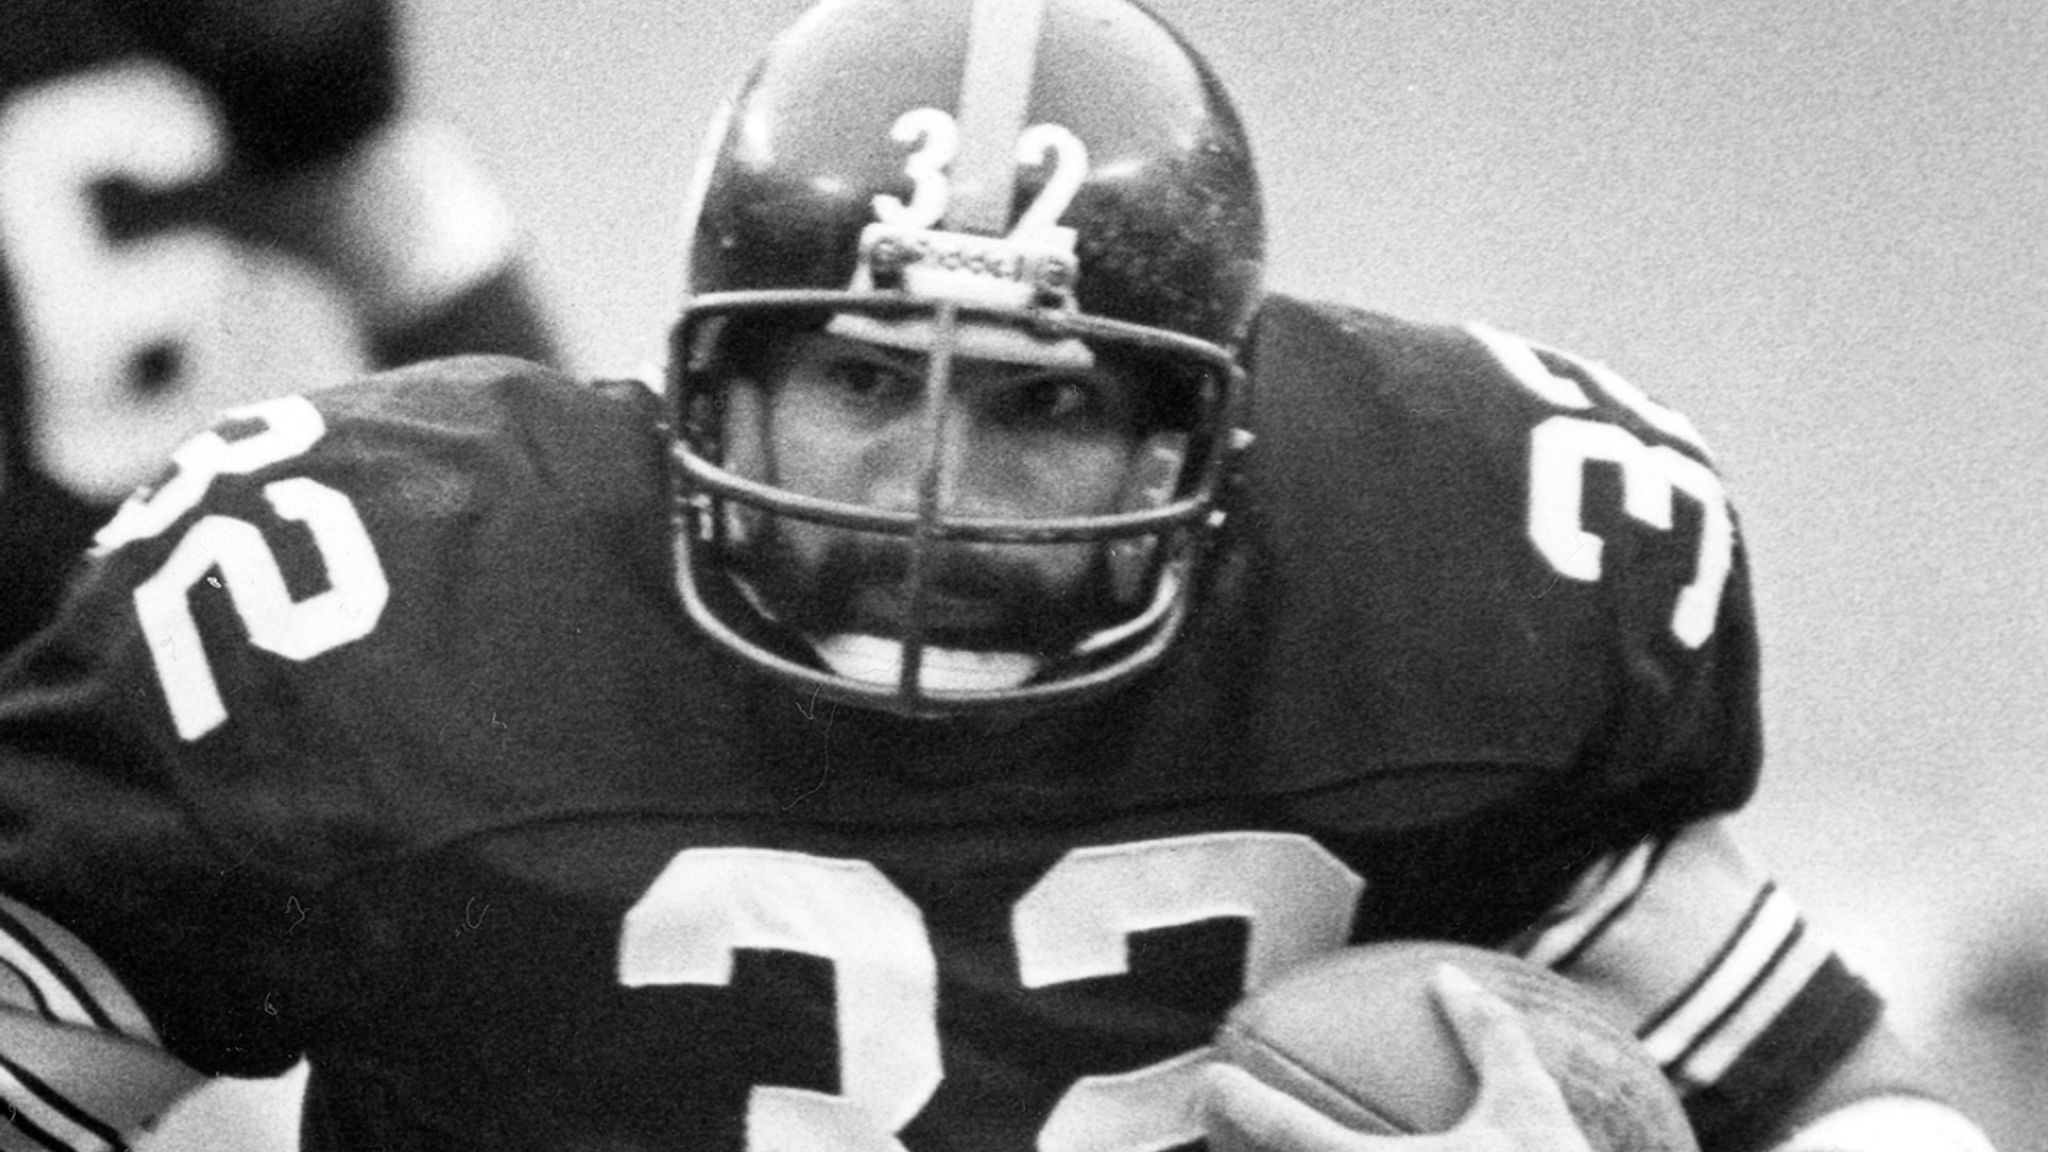 Pittsburgh Steelers to retire Franco Harris' No. 32 jersey